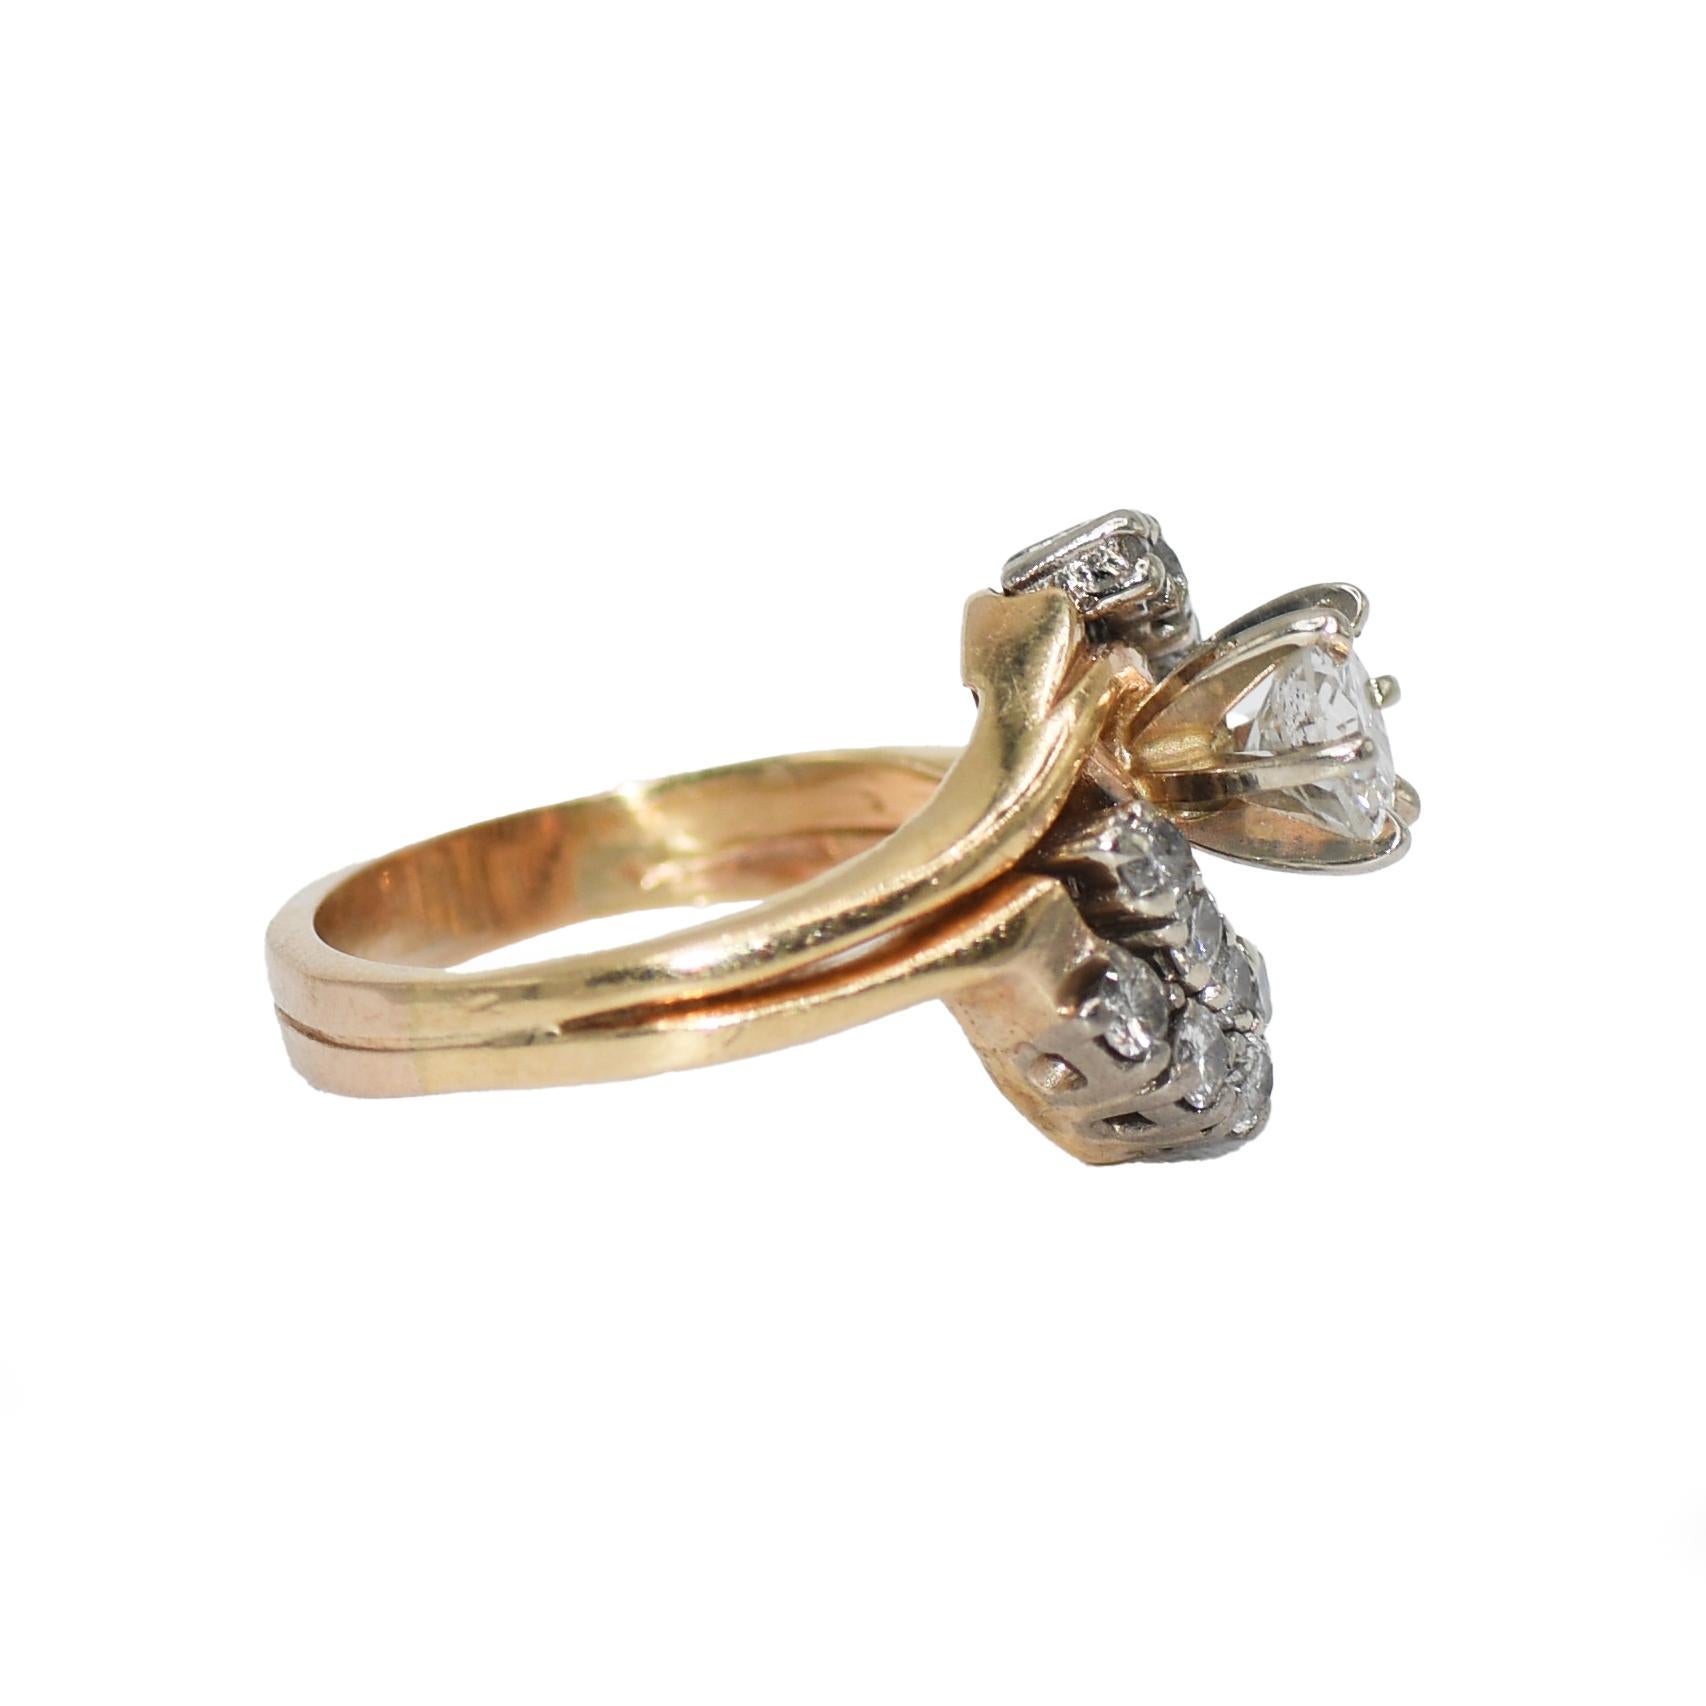 14K Yellow Gold Diamond Ring .90tdw, 6.8gr
14k yellow gold diamond ring.
The center stone is a round brilliant cut, .60ct.
Clarity is I1, I-J Color.
There is an additional .30tdw, also RBC..
I1, j-k Color.
Ring weighs 6.8gr, tests 14k
Size 5
can be